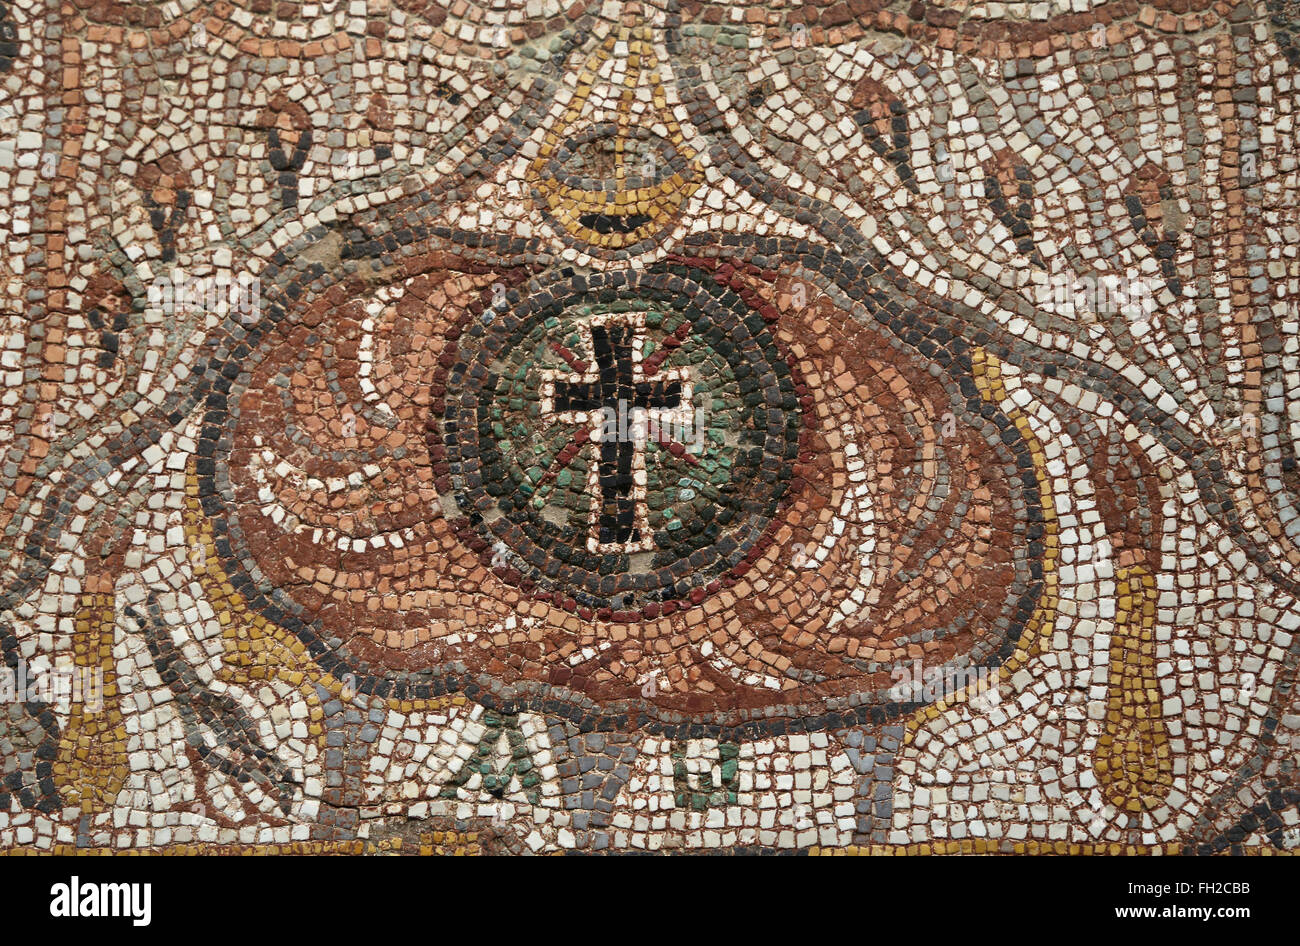 Roman mosaic of the inside of a church. Eastern Mediterranean, 5th century AD. Louvre Museum. Paris. France. Stock Photo